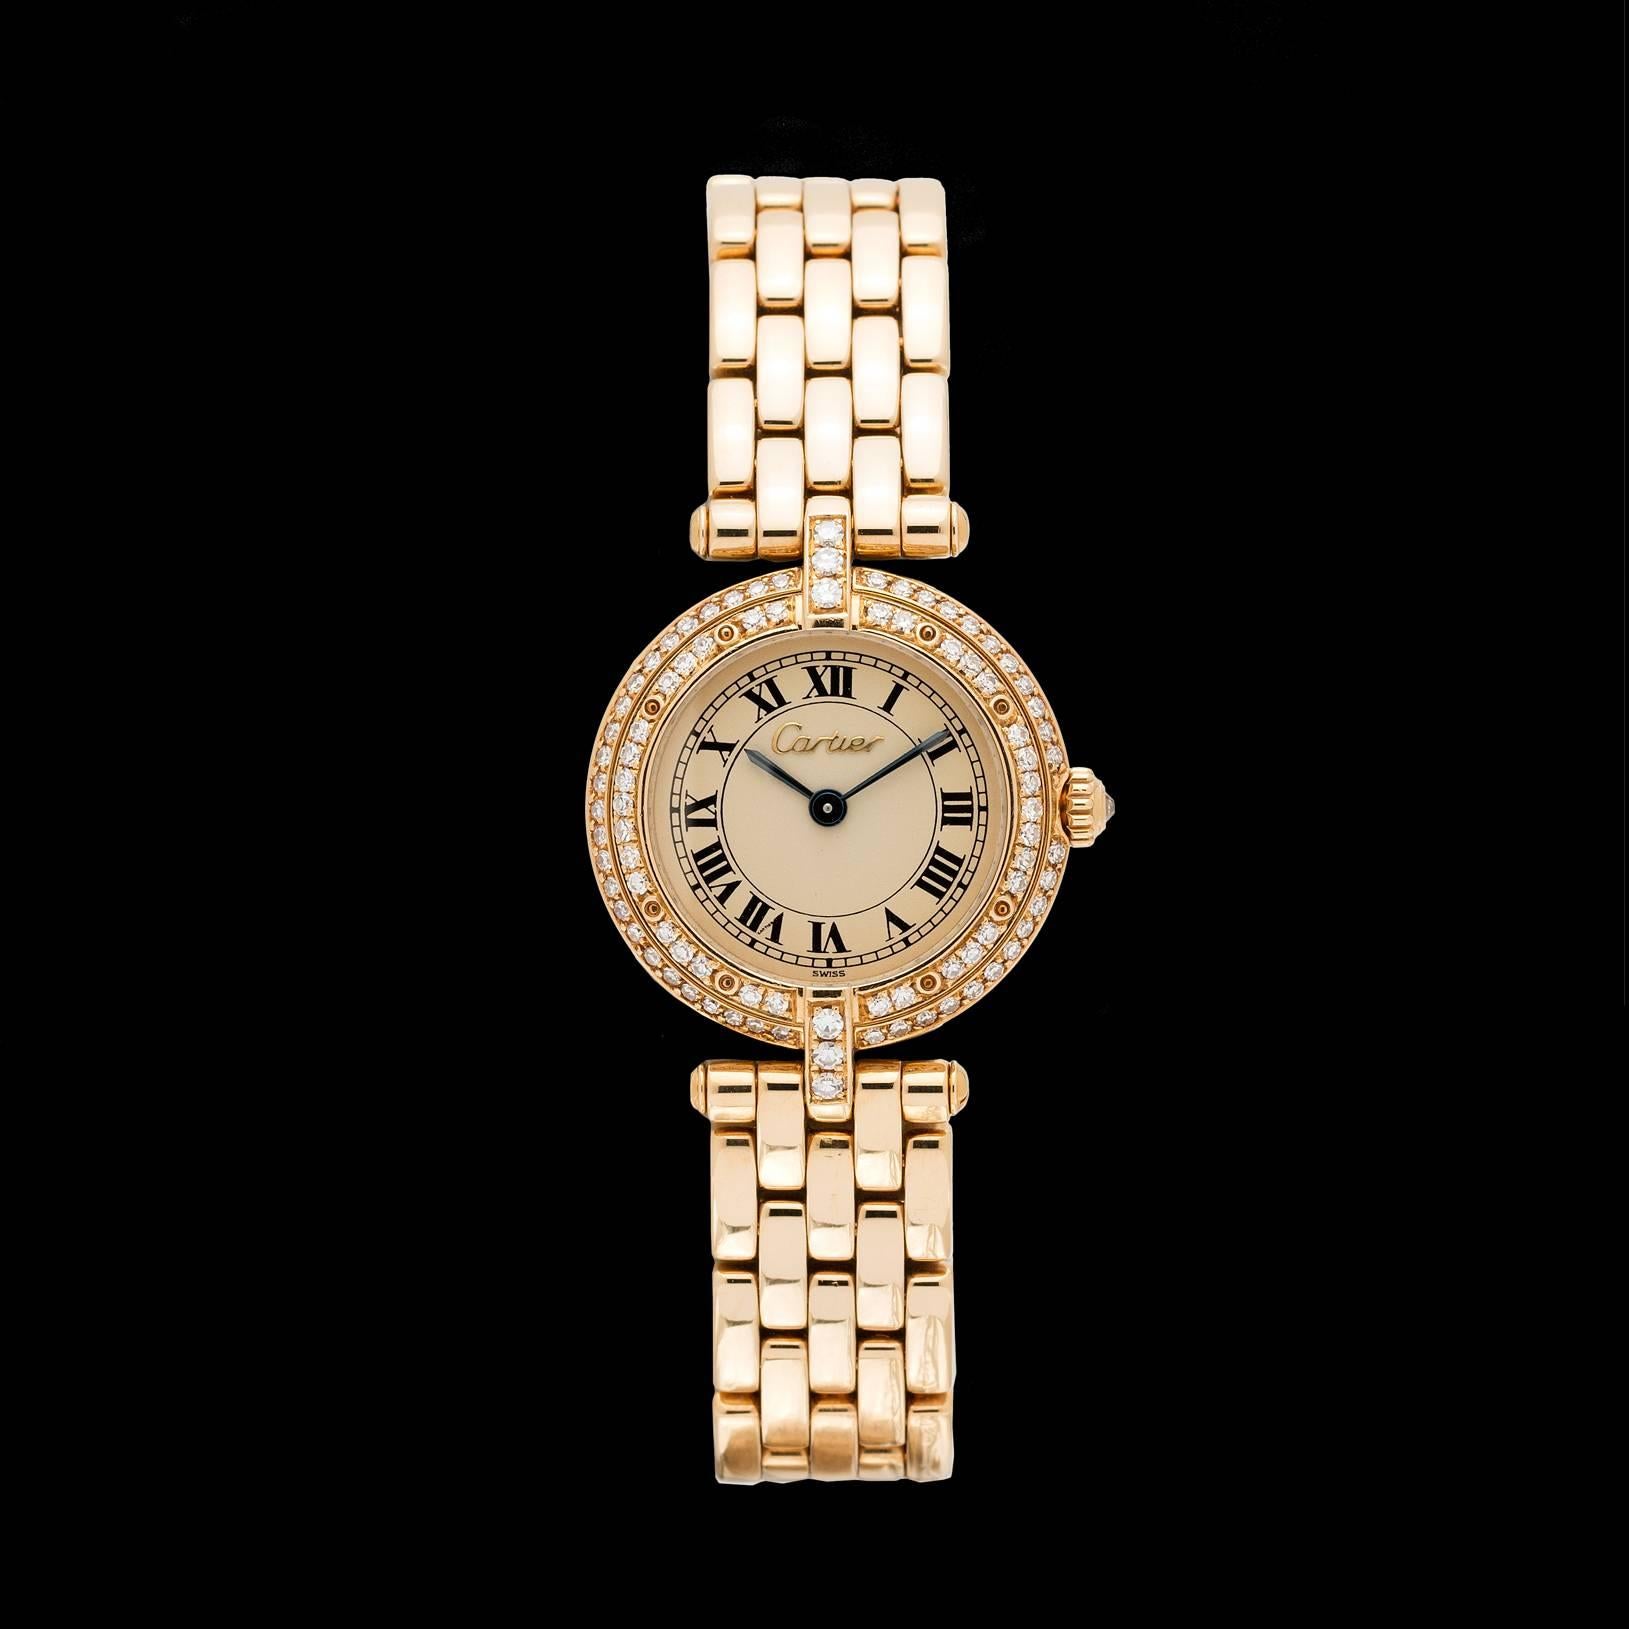 Cartier 18k yellow gold ladies Panthere collection model Vendome with diamond bezel & crown. The dial is a cream color with blue-steel hands detailed with a gold colored 'Cartier' signature name. Watch movement is a quartz operated by a battery. The